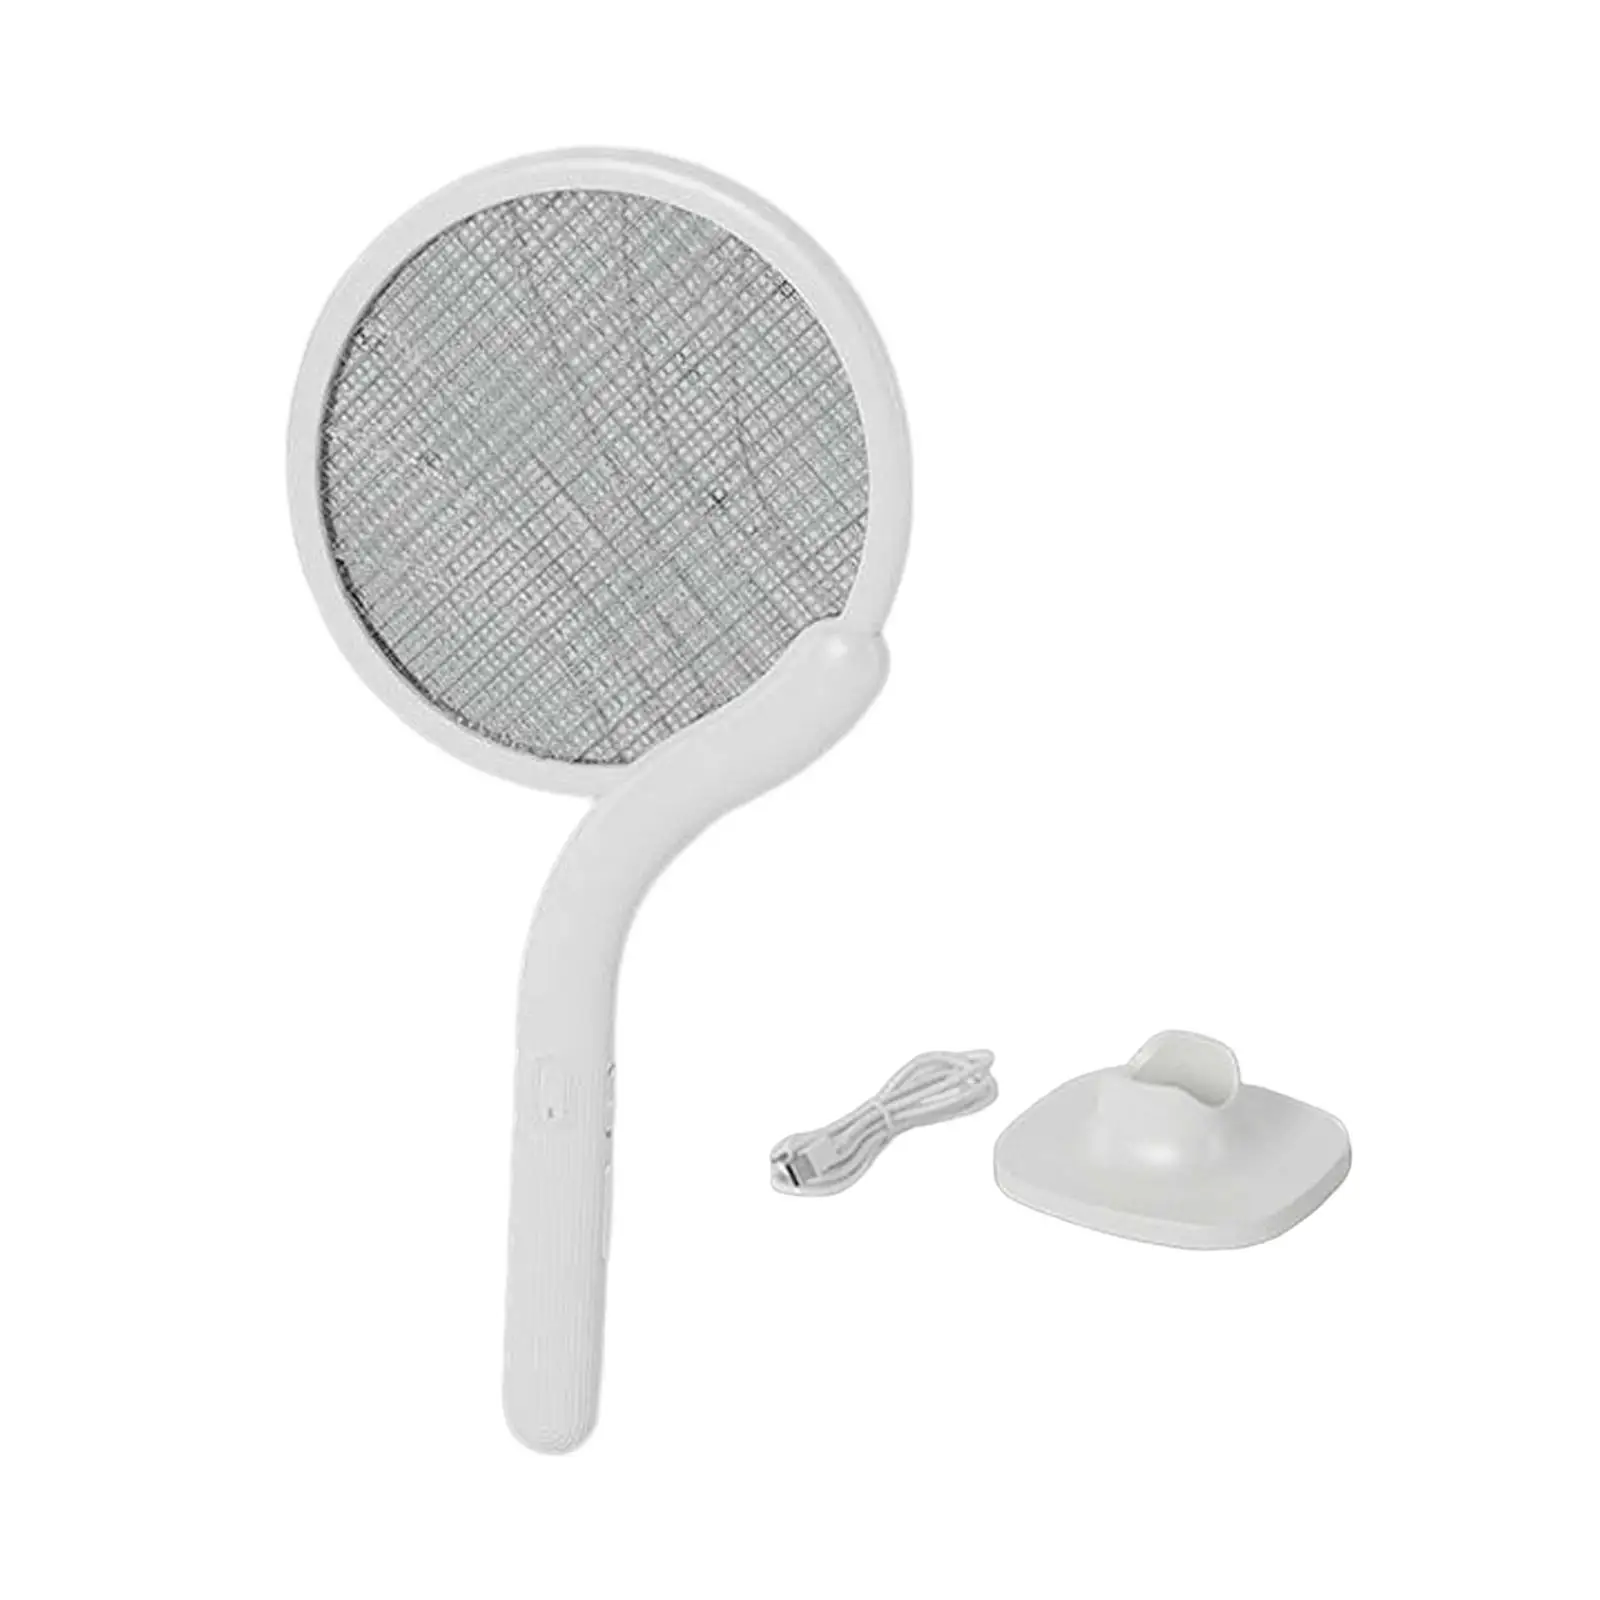 3500V Electric Fly Swatter Racket Powerful Standing & Handheld Flying Bugs Trap Fly Killer for Kitchen Backyard Patio Office